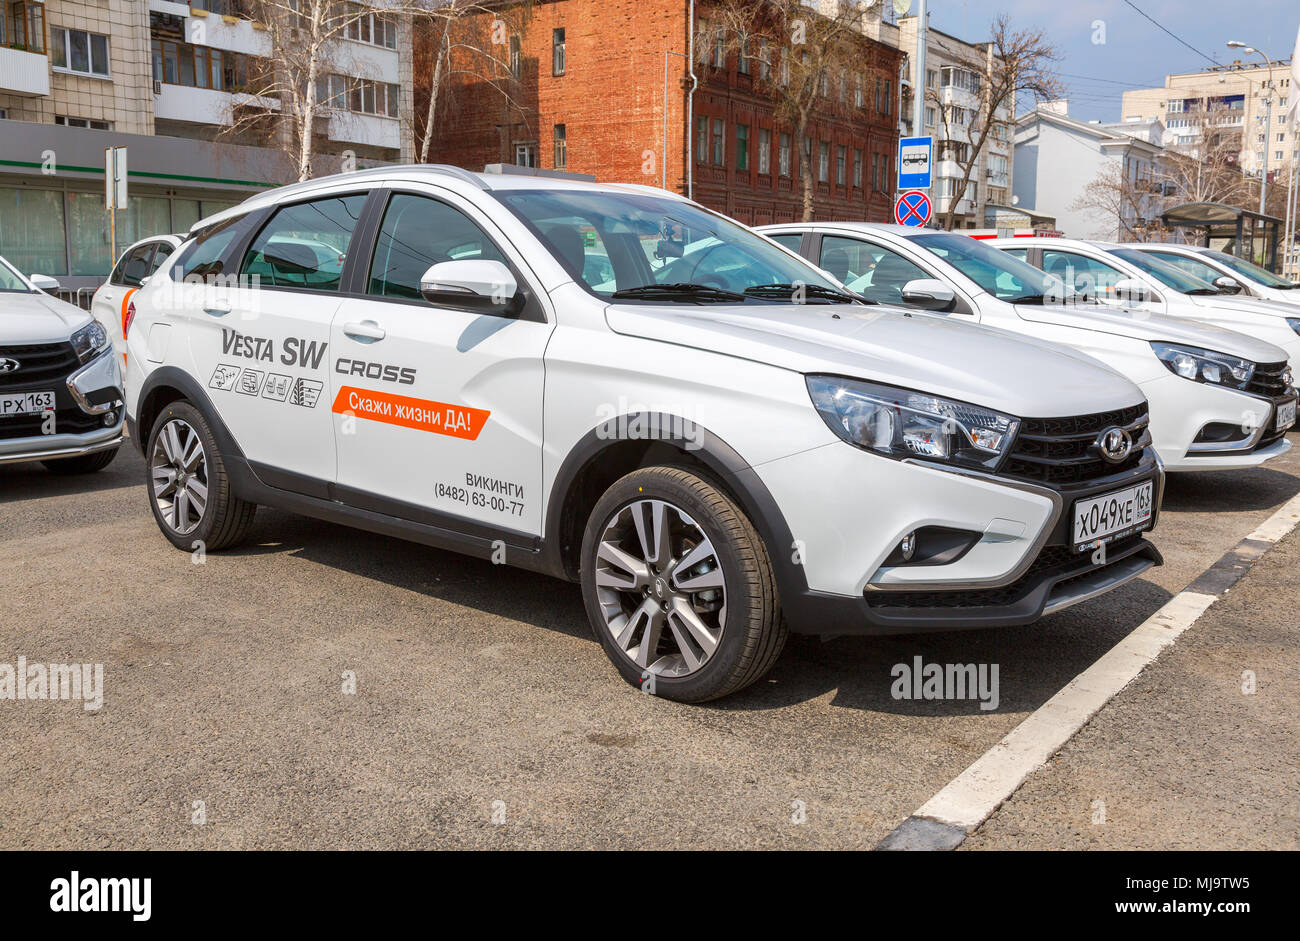 Lada Vesta Sw Cross High Resolution Stock Photography and Images - Alamy